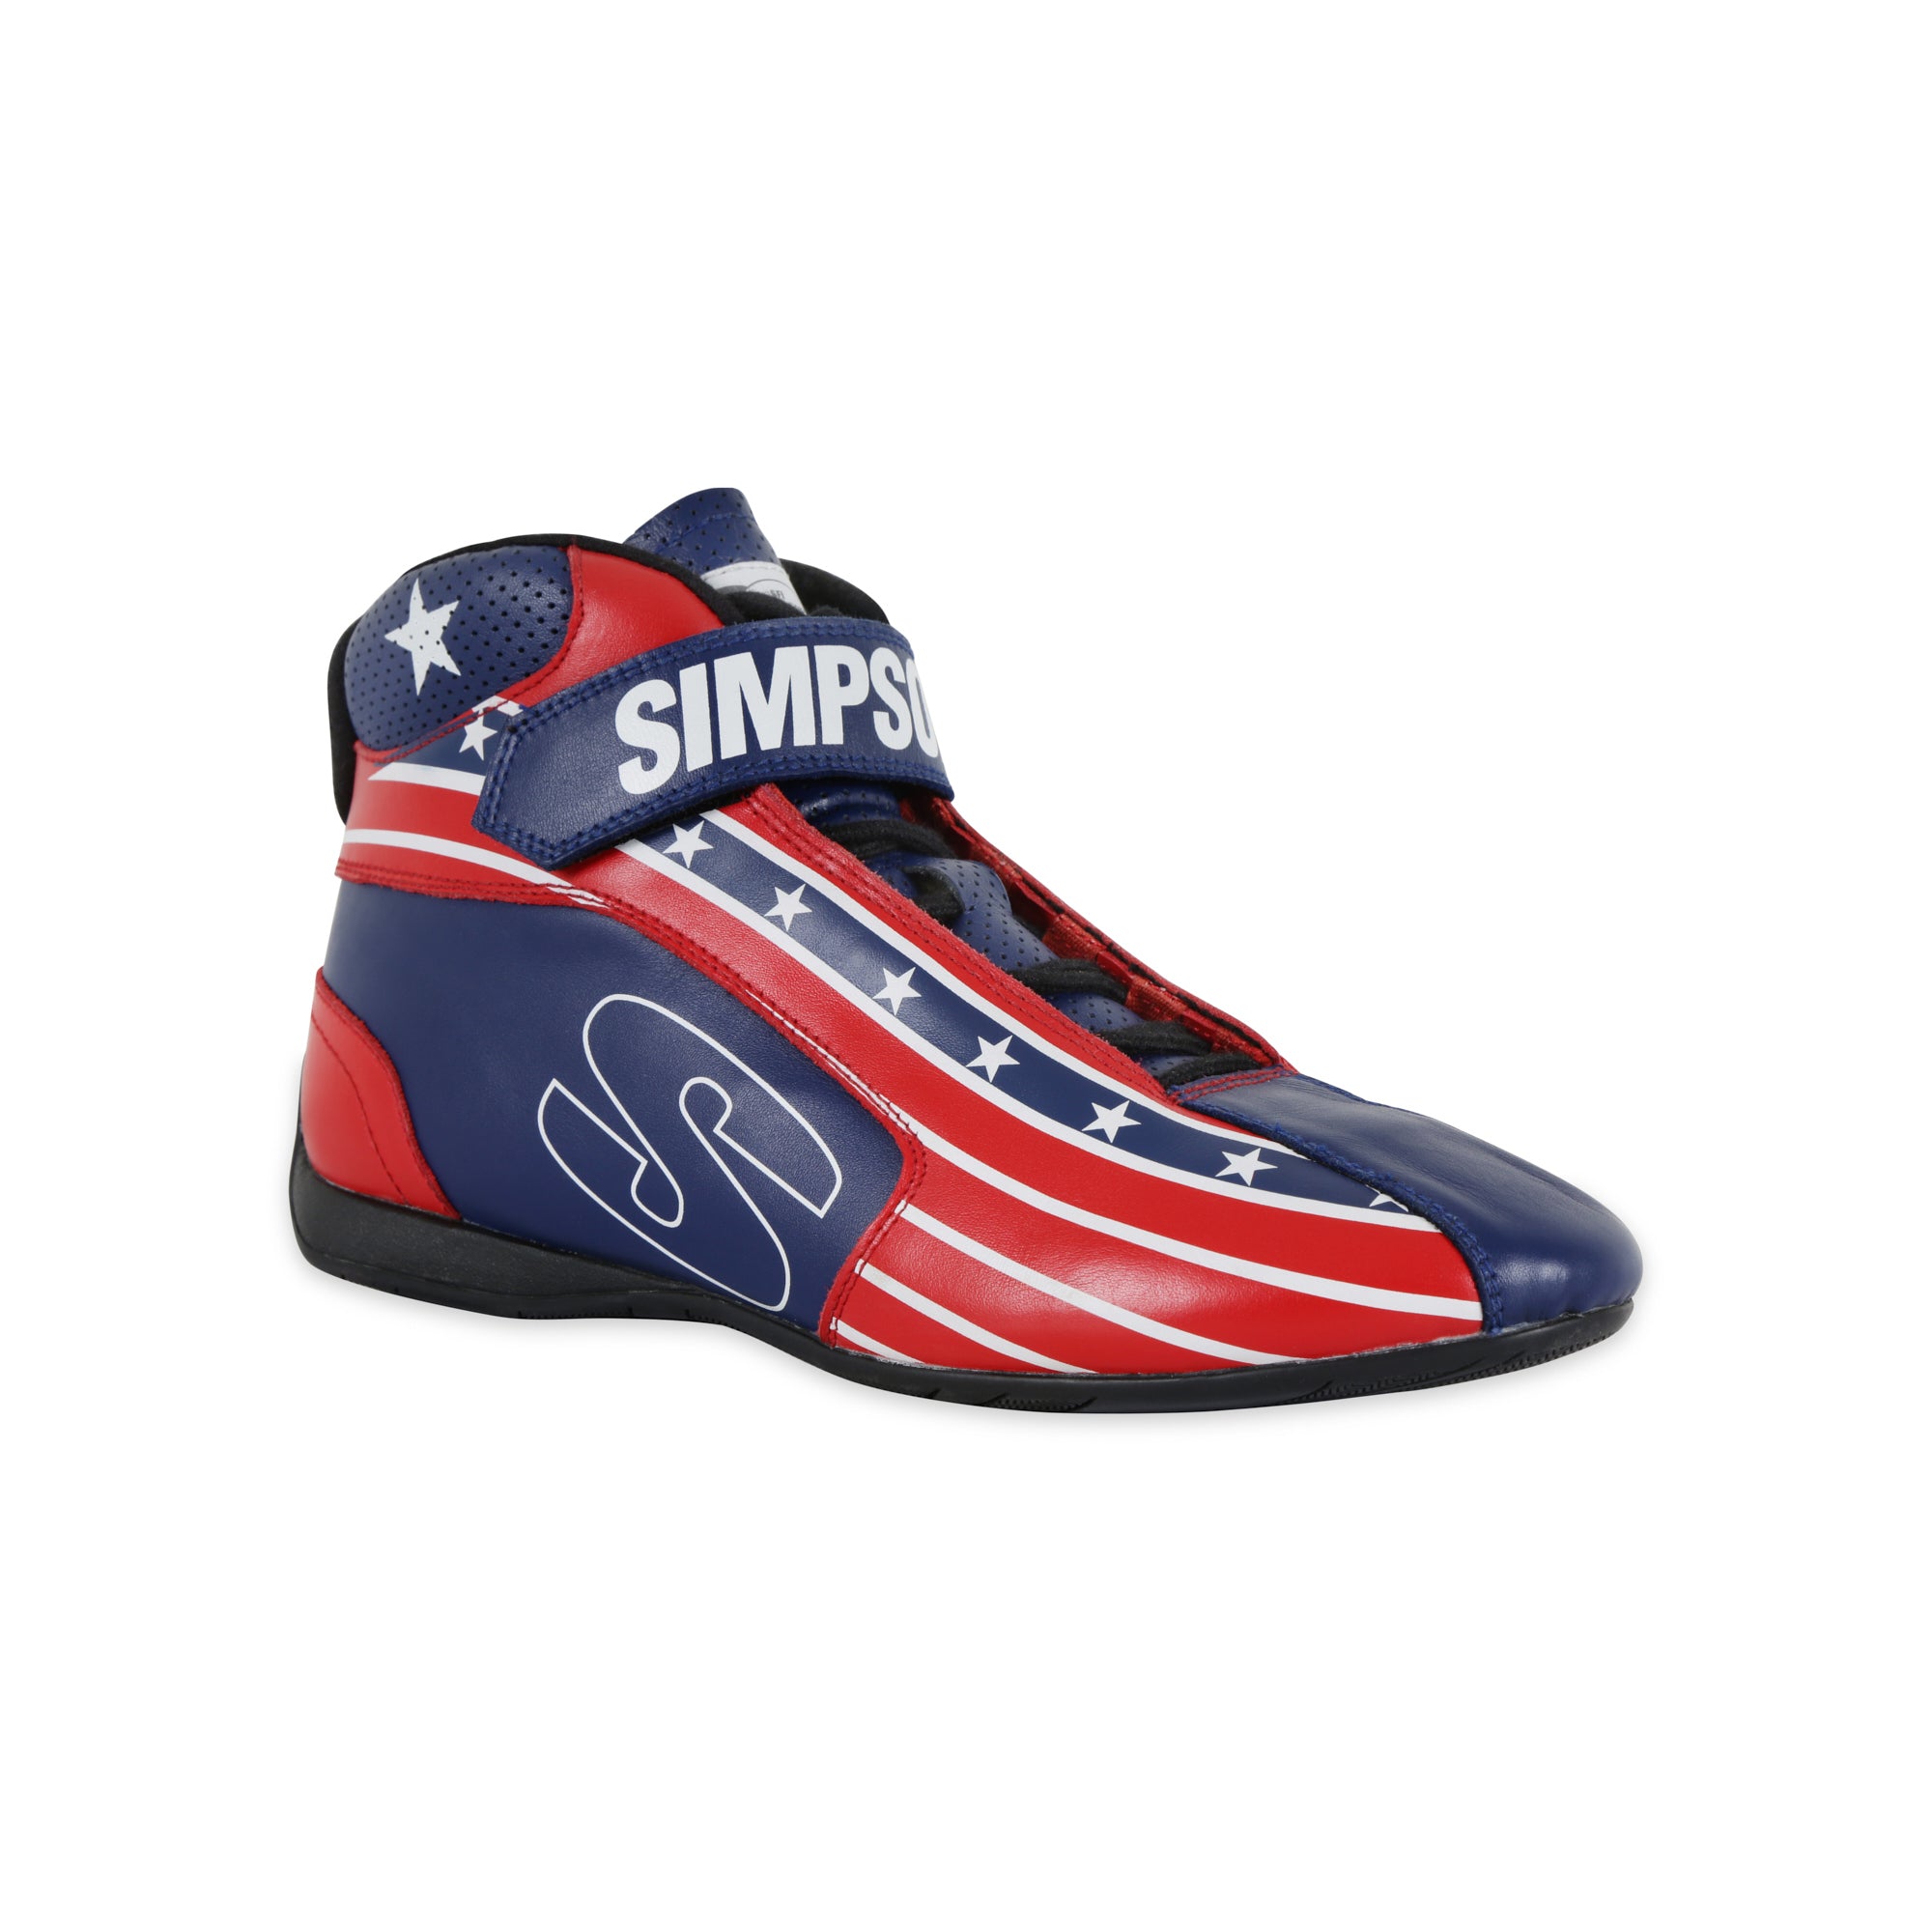 Simpson Shoe DNA X2 Patriot Size 11 Safety Clothing Driving Shoes and Boots main image